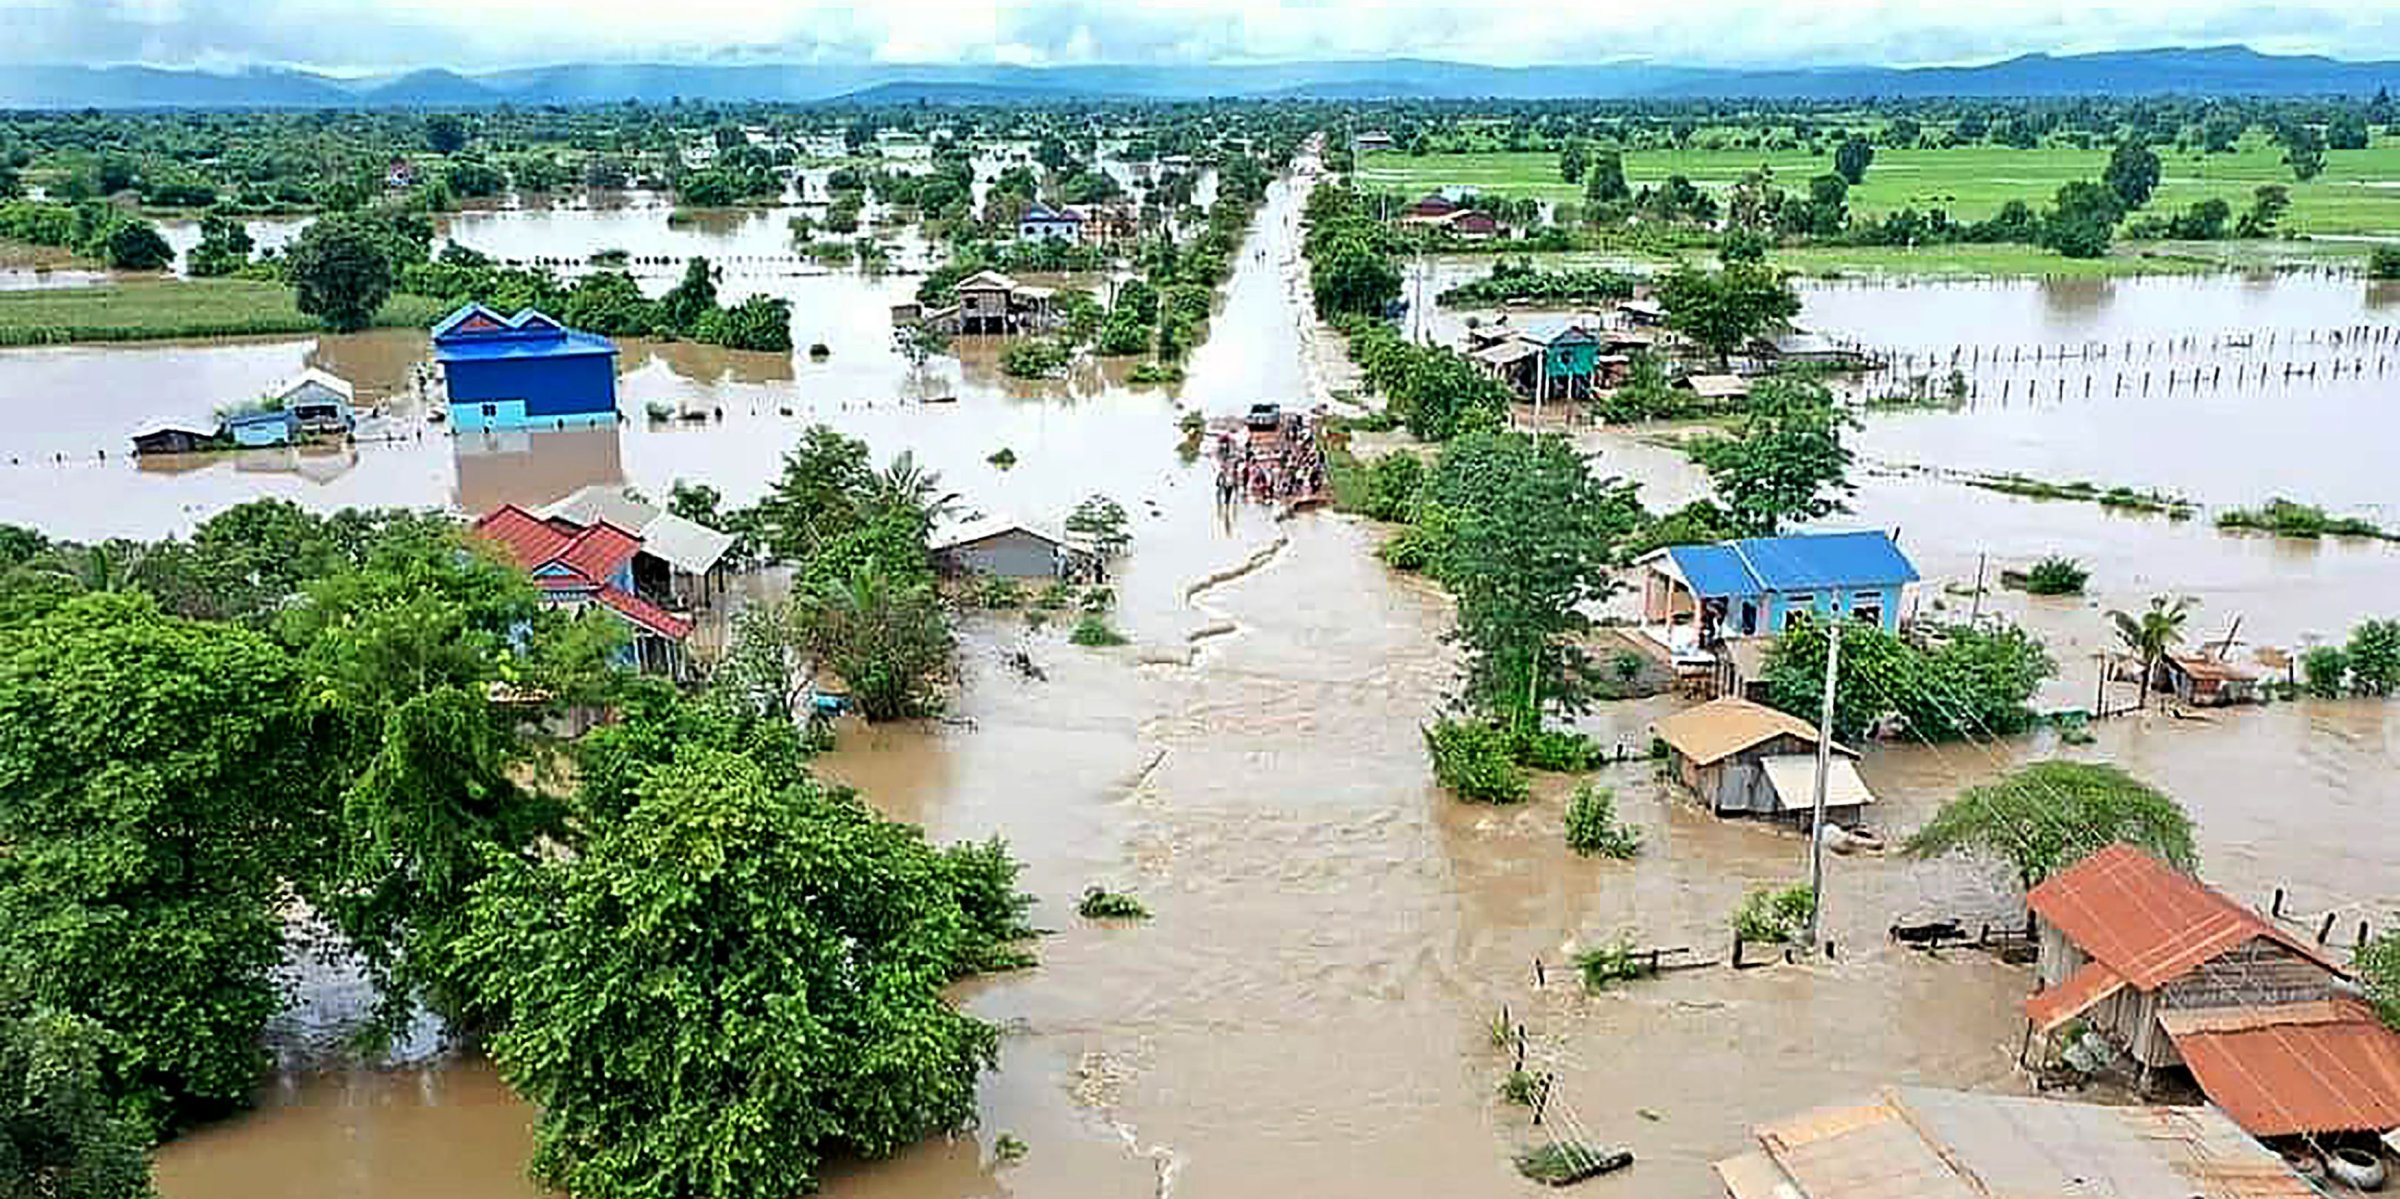 20 Killed, Over 26,000 Evacuated In Cambodia Due To Flooding